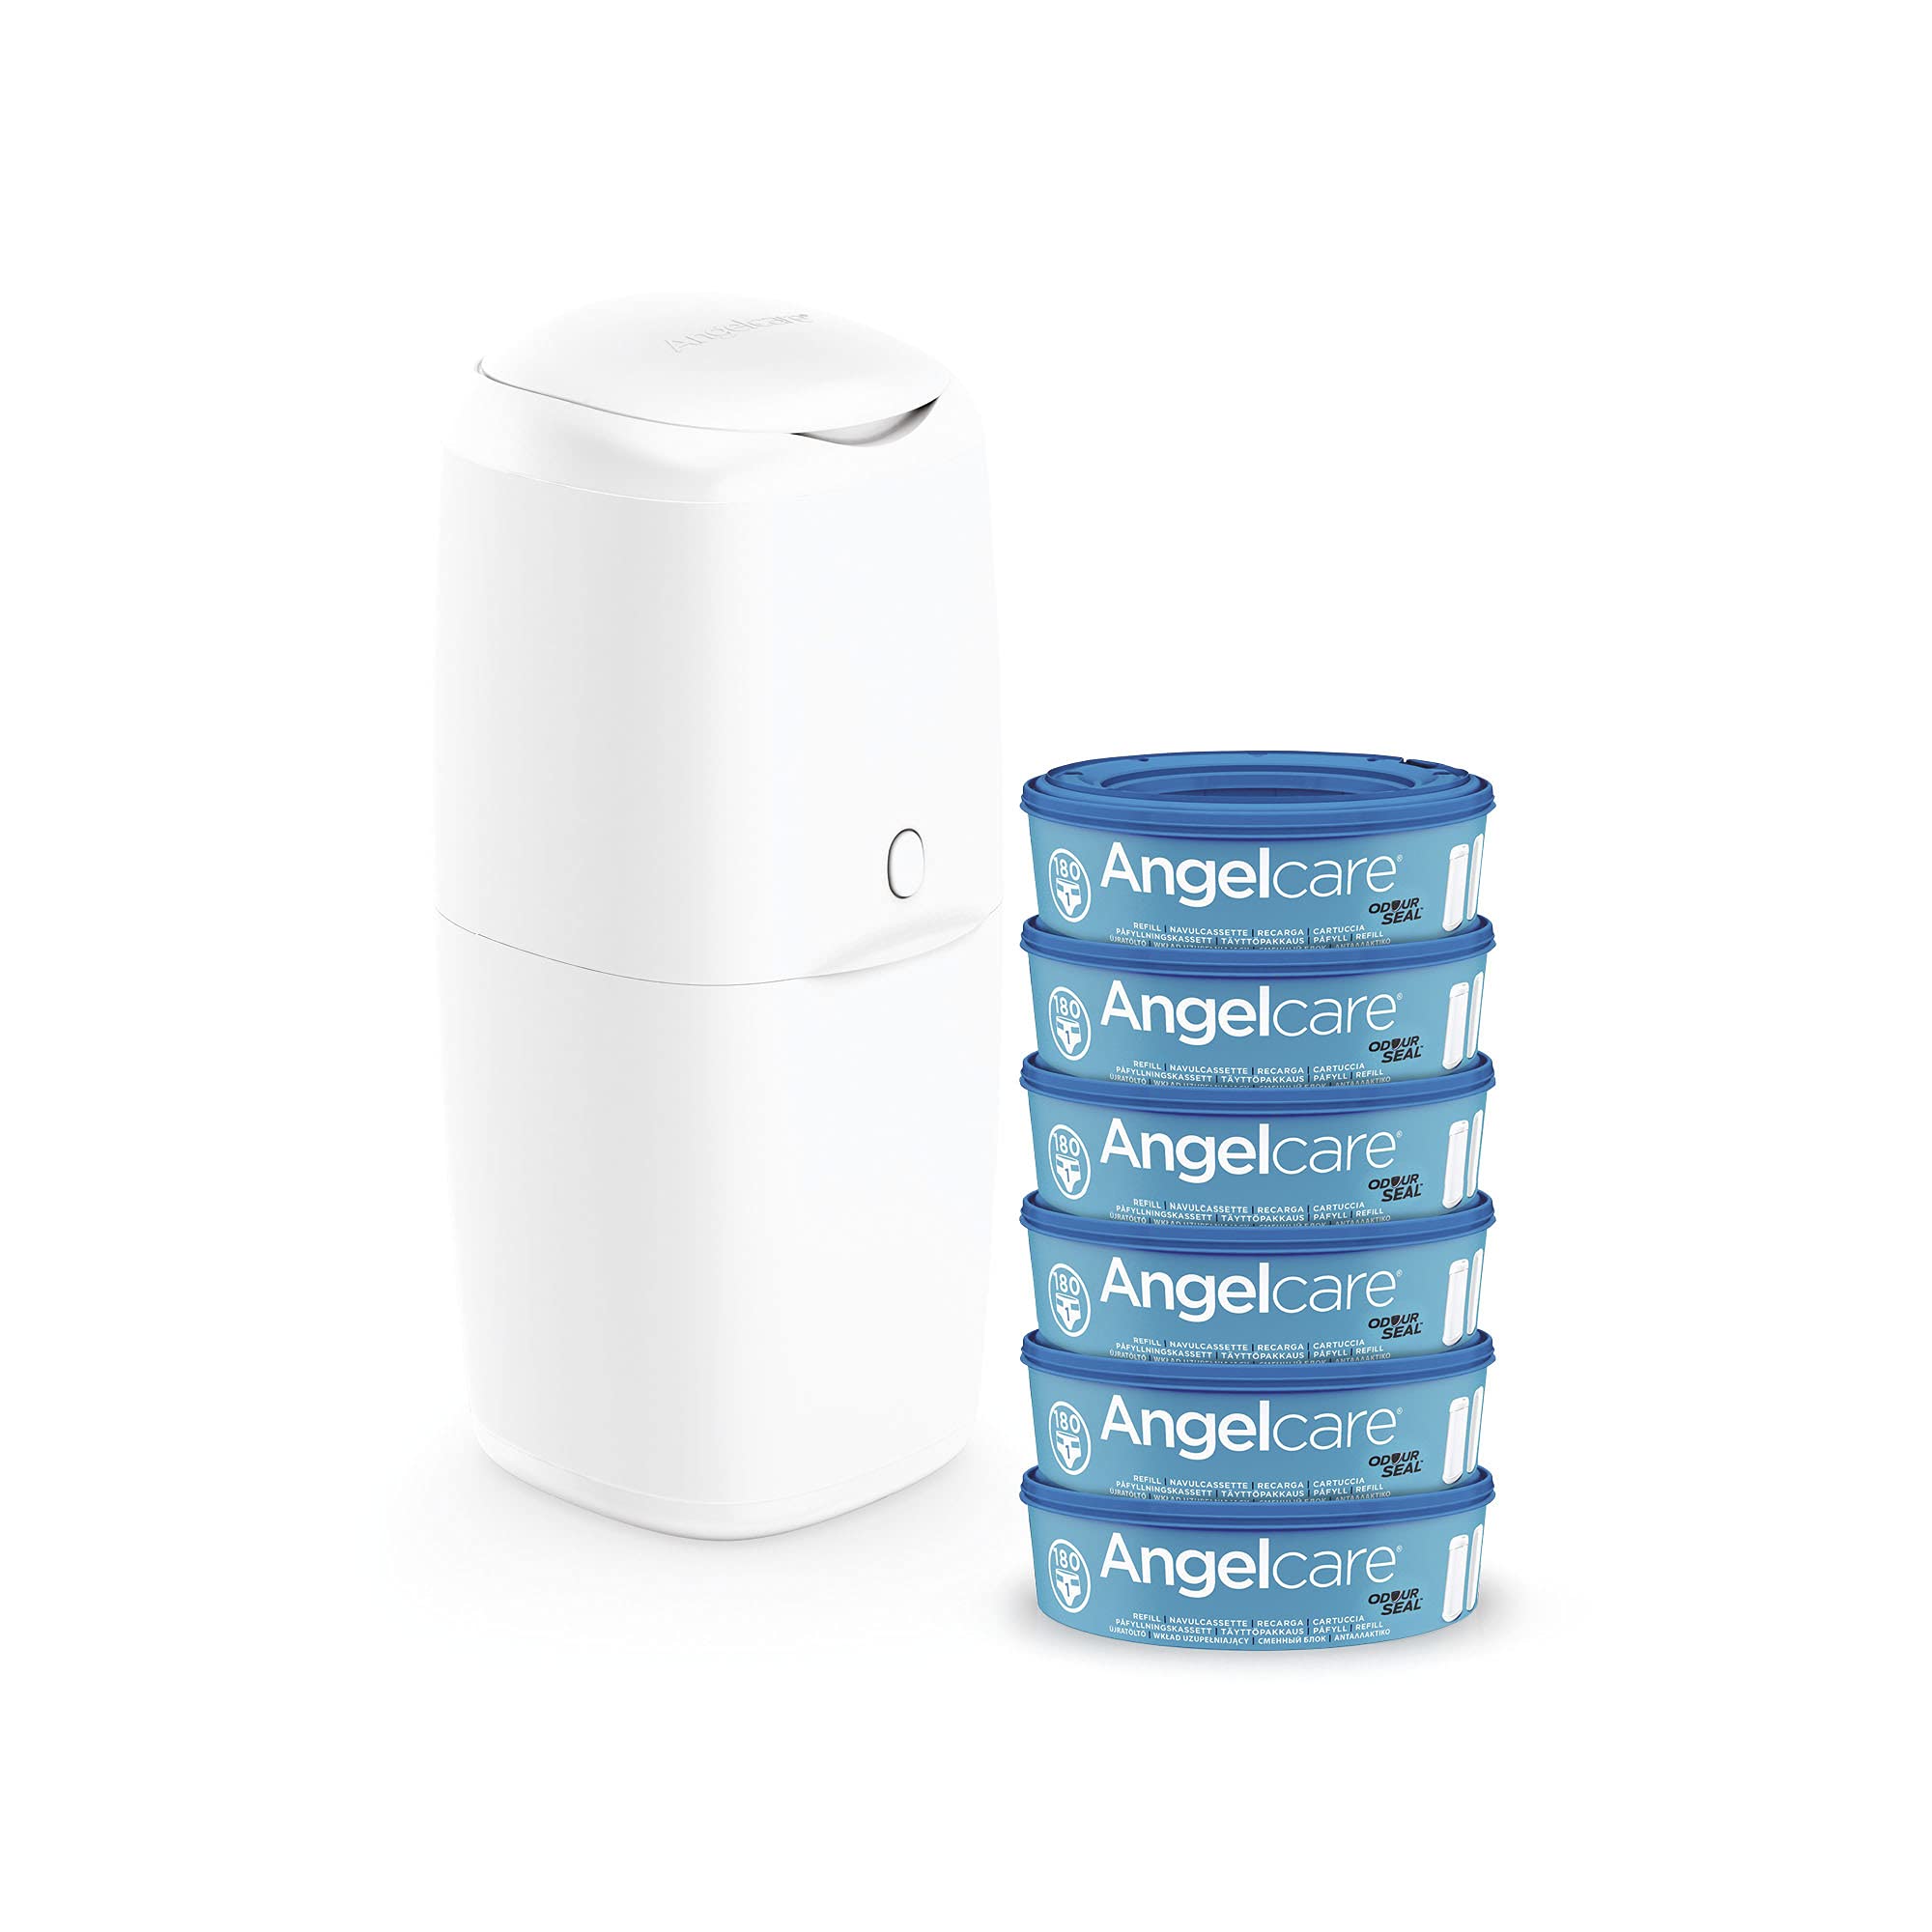 Angelcare Nappy Disposal System Value Pack